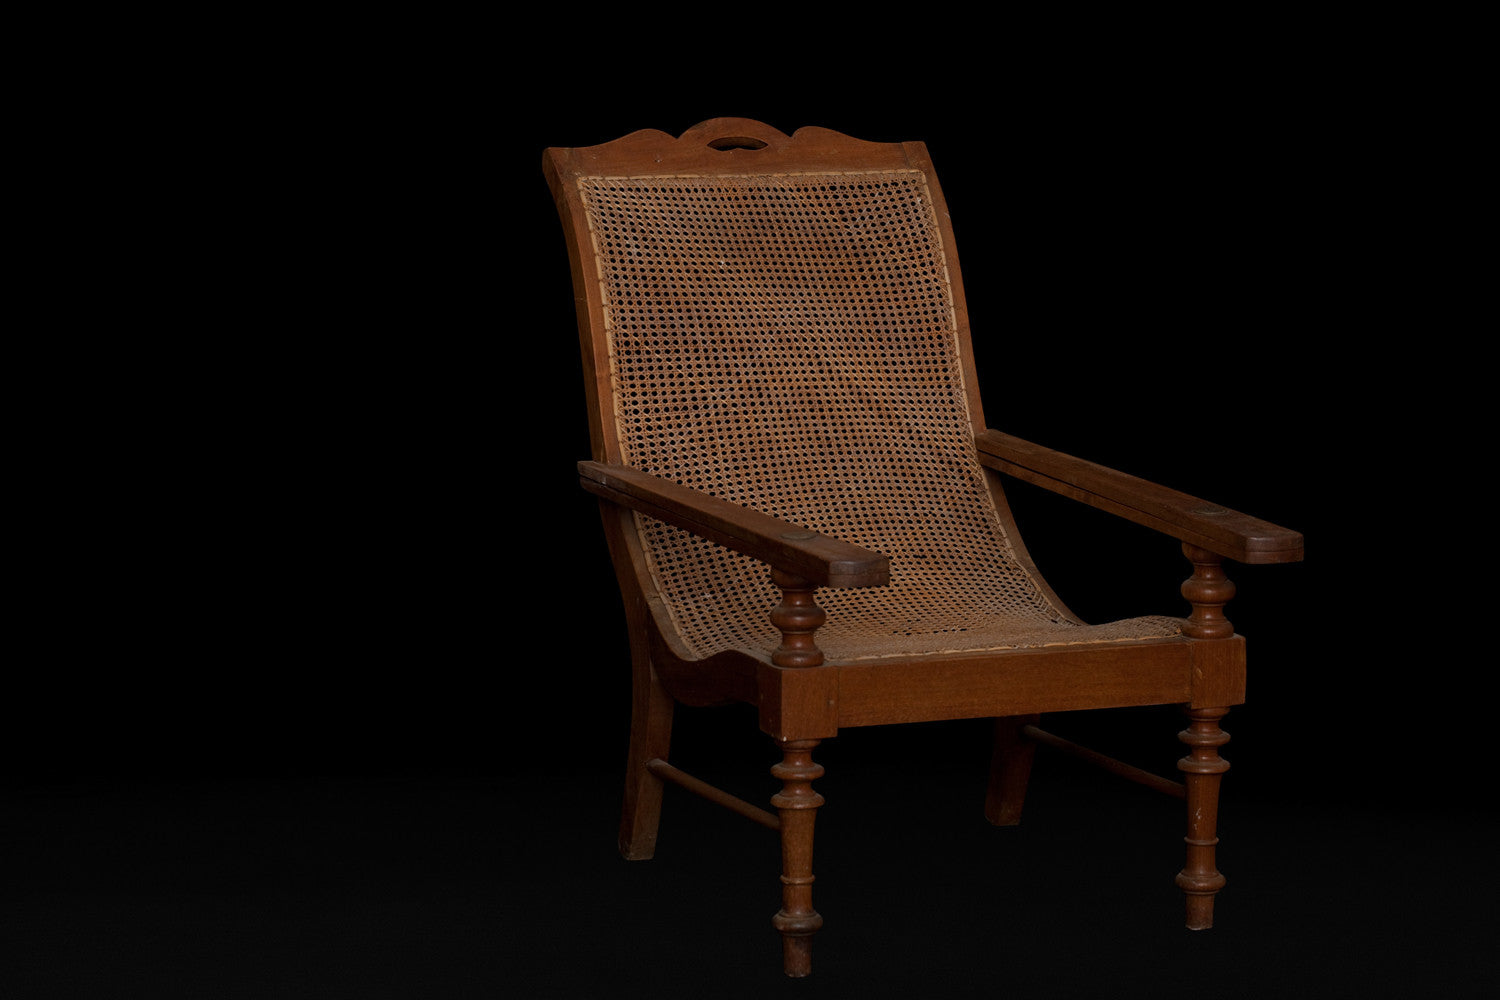 19th Century Teak and Rattan English Colonial Lounge Chair from Singapore